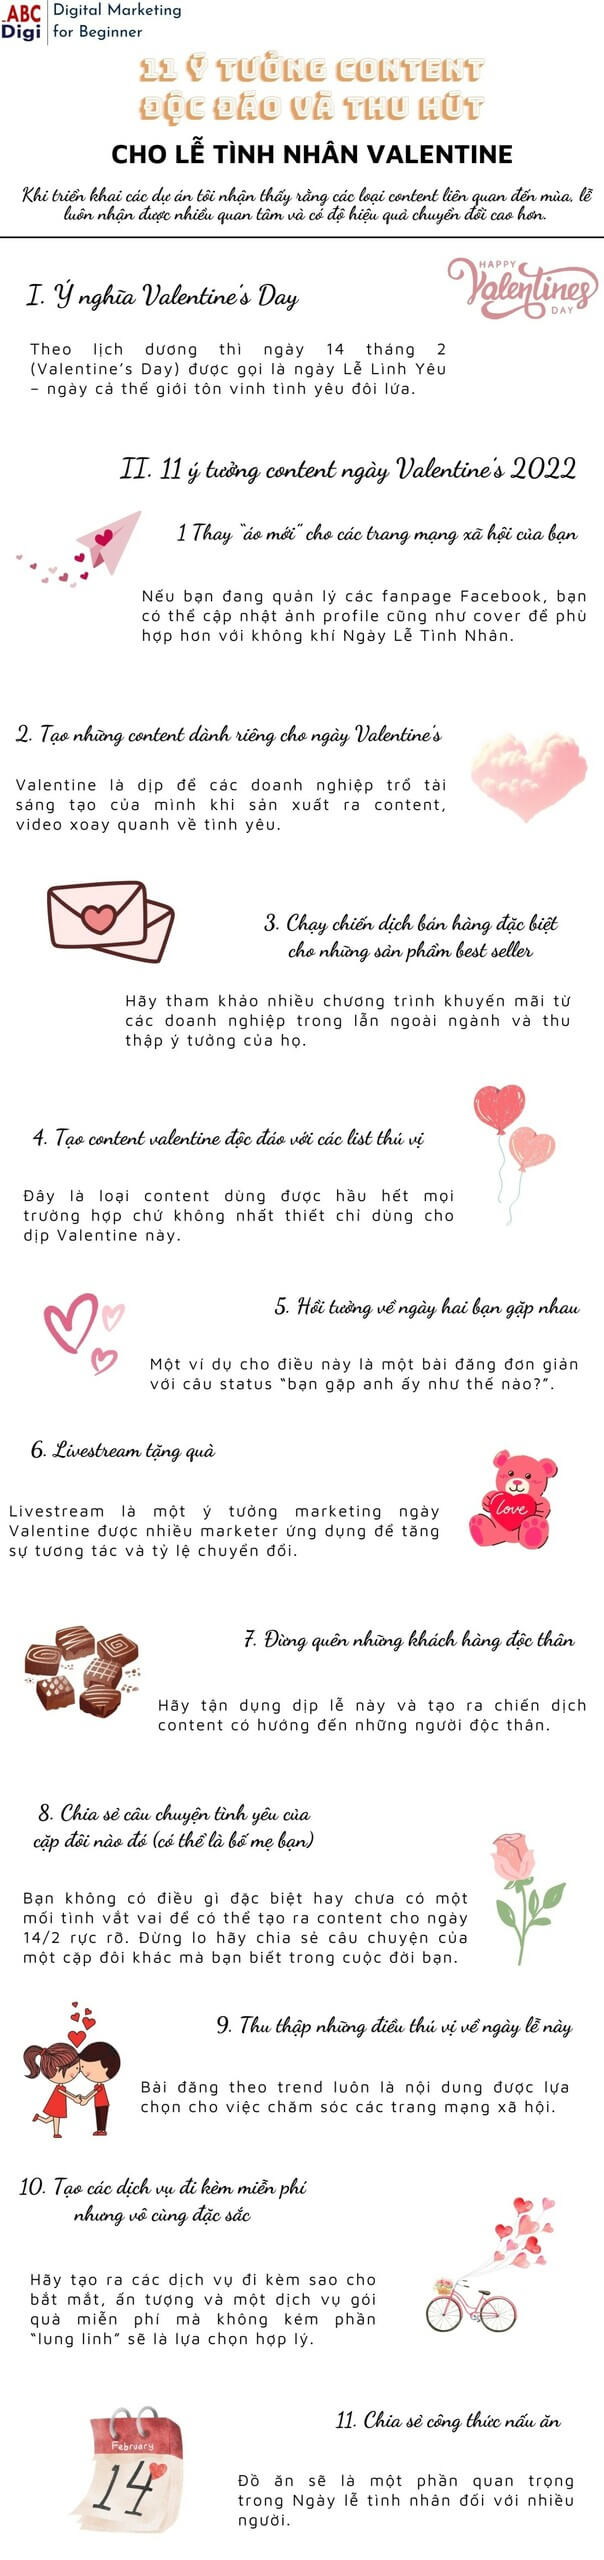 infographic content le tinh nhan valentine scaled